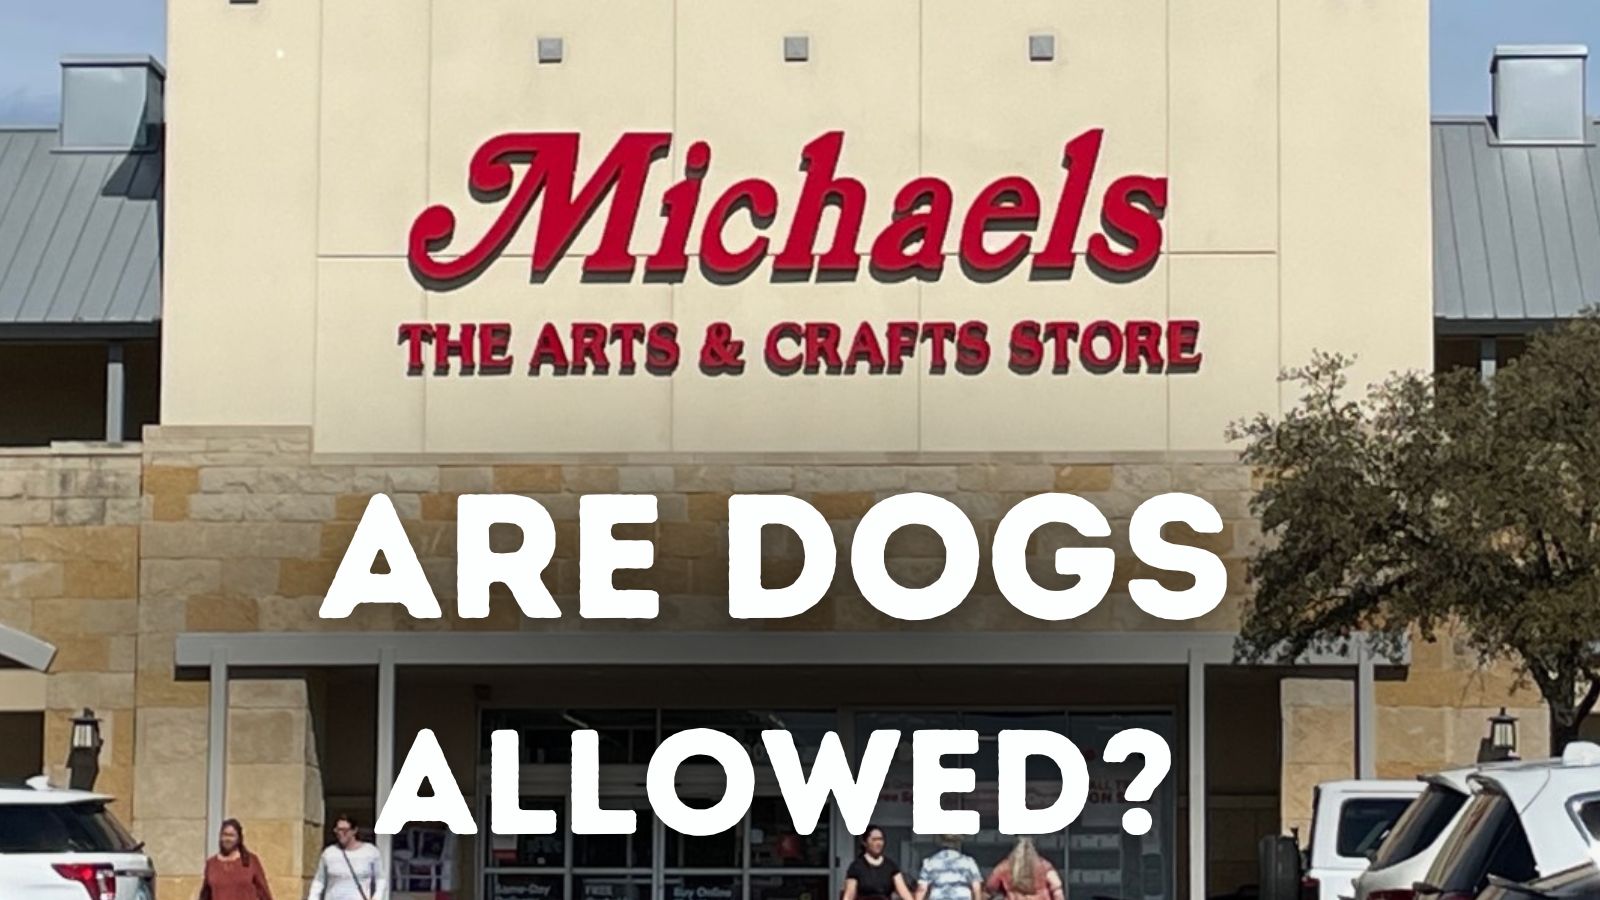 https://www.dogtipper.com/wp-content/uploads/2022/10/featured-Are-dogs-allowed-in-michaels.jpg